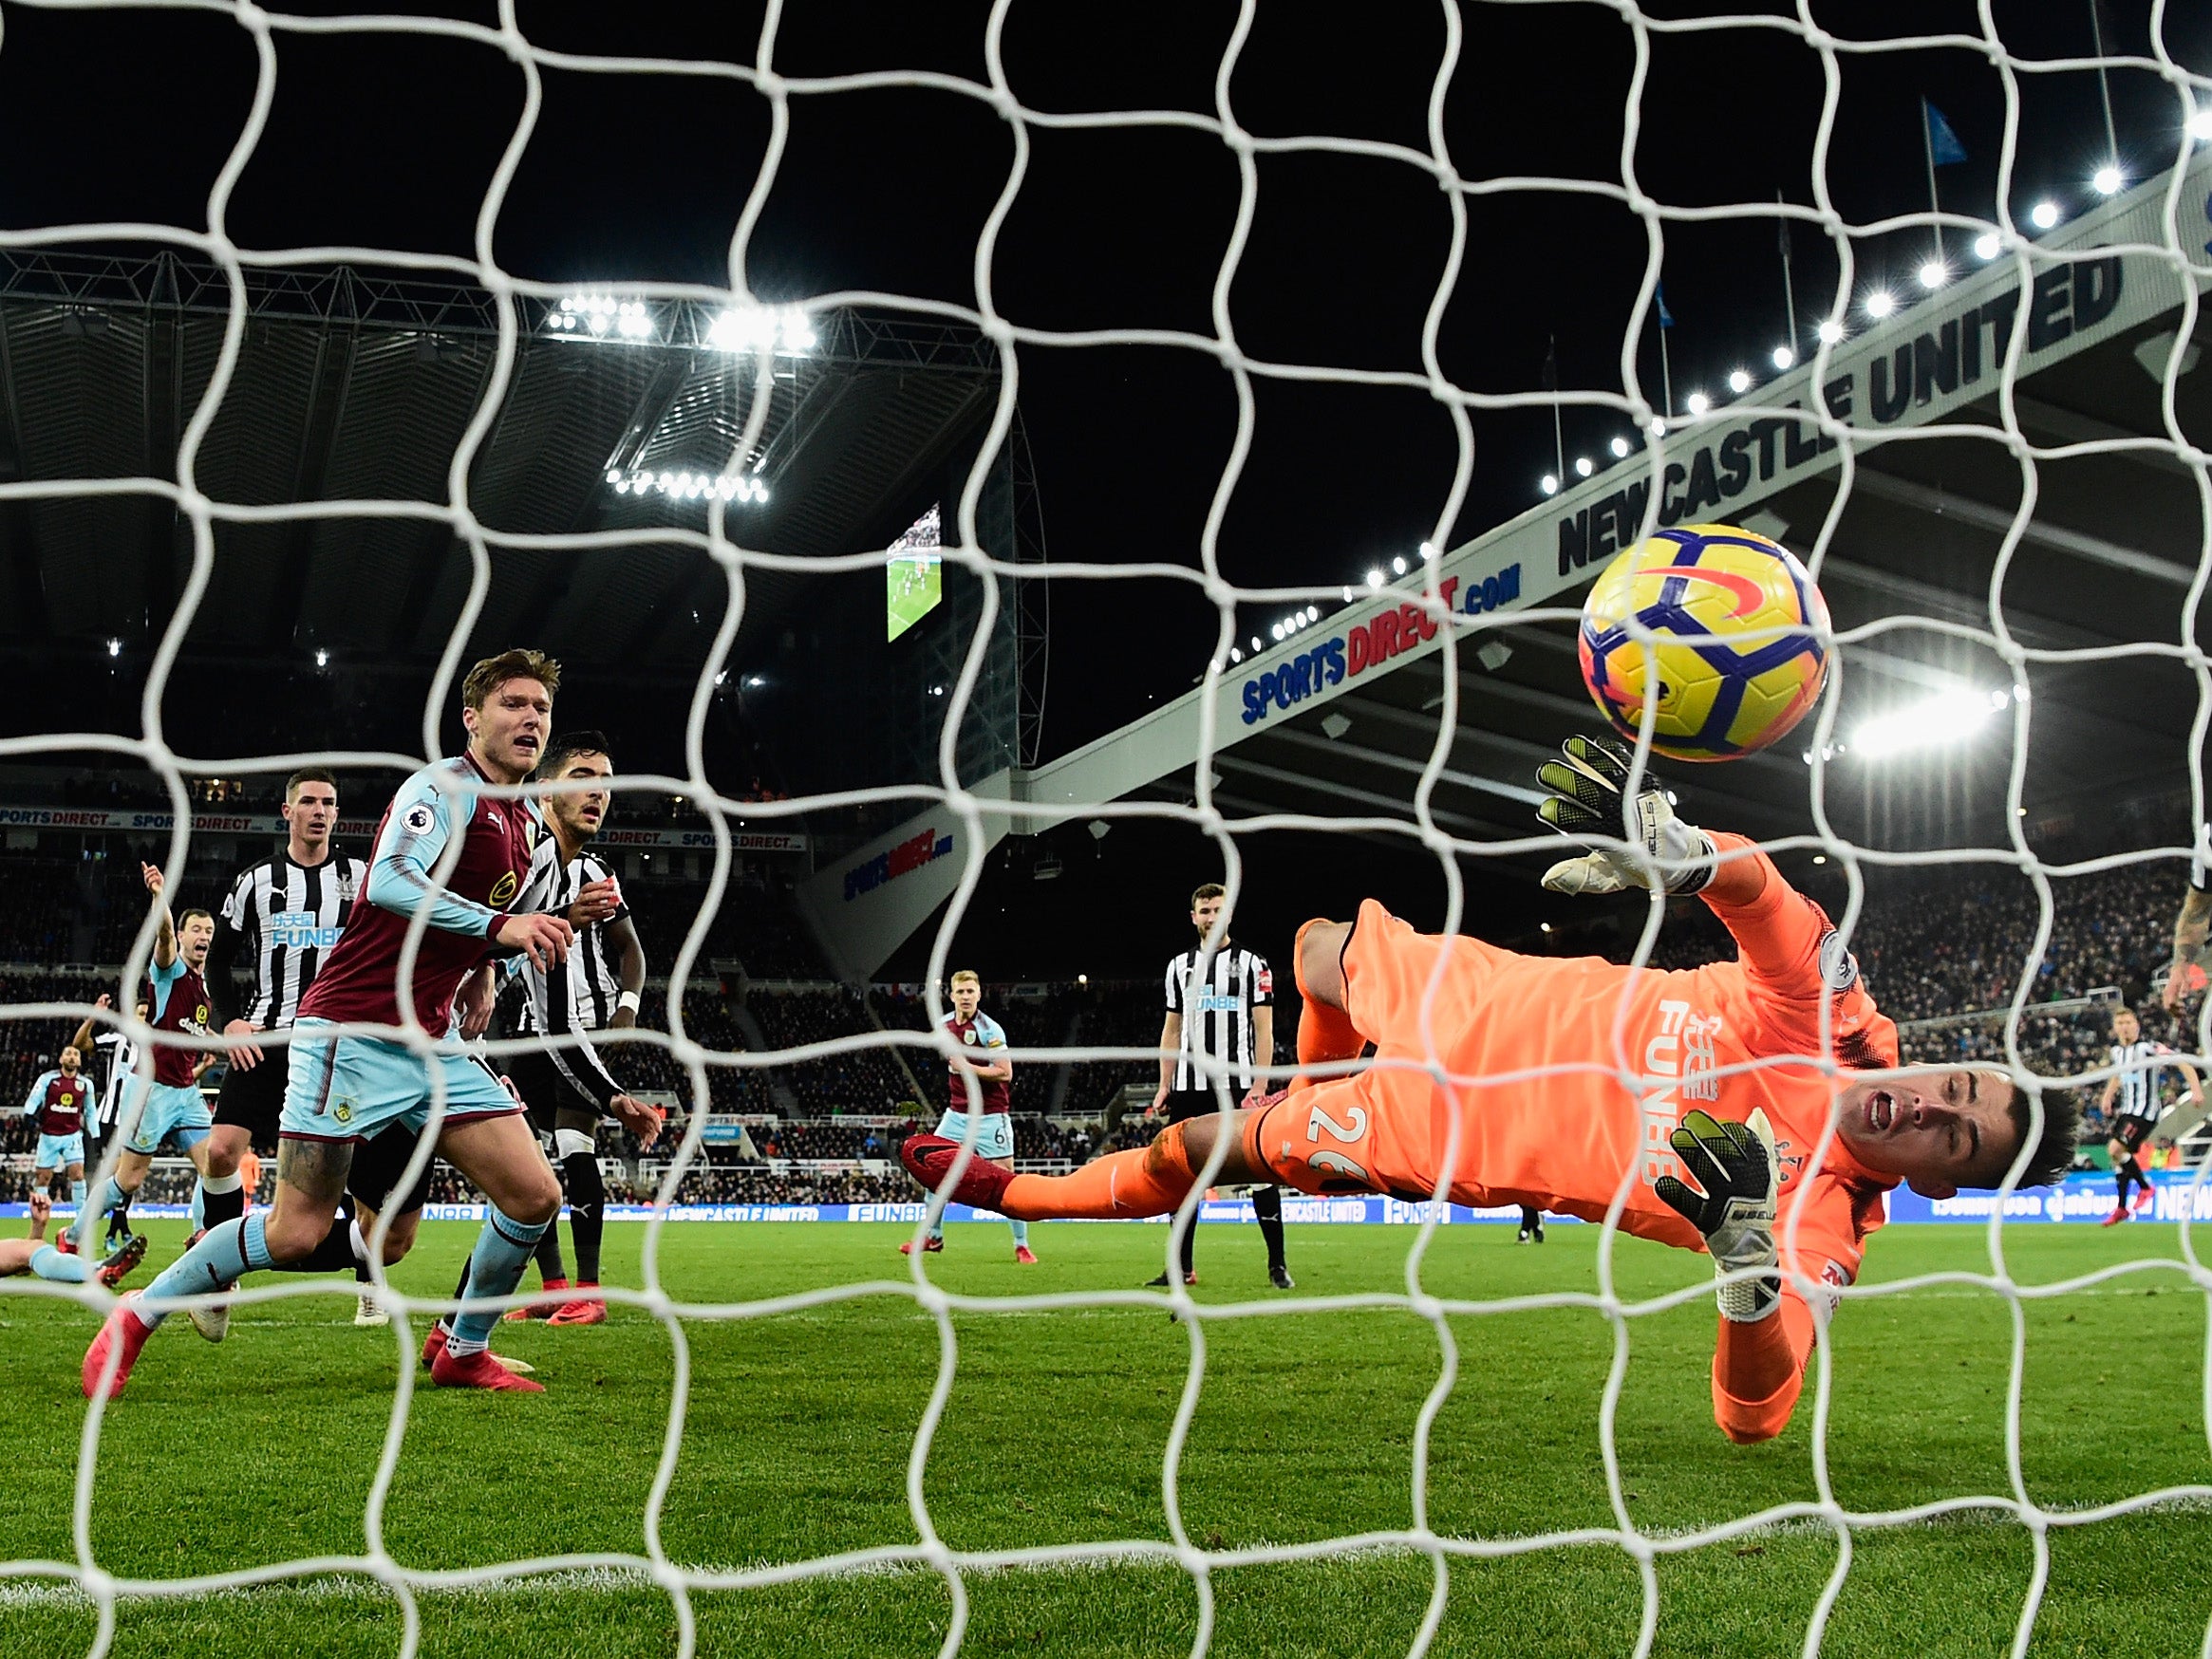 Karl Darlow inadvertently scored the decisive goal